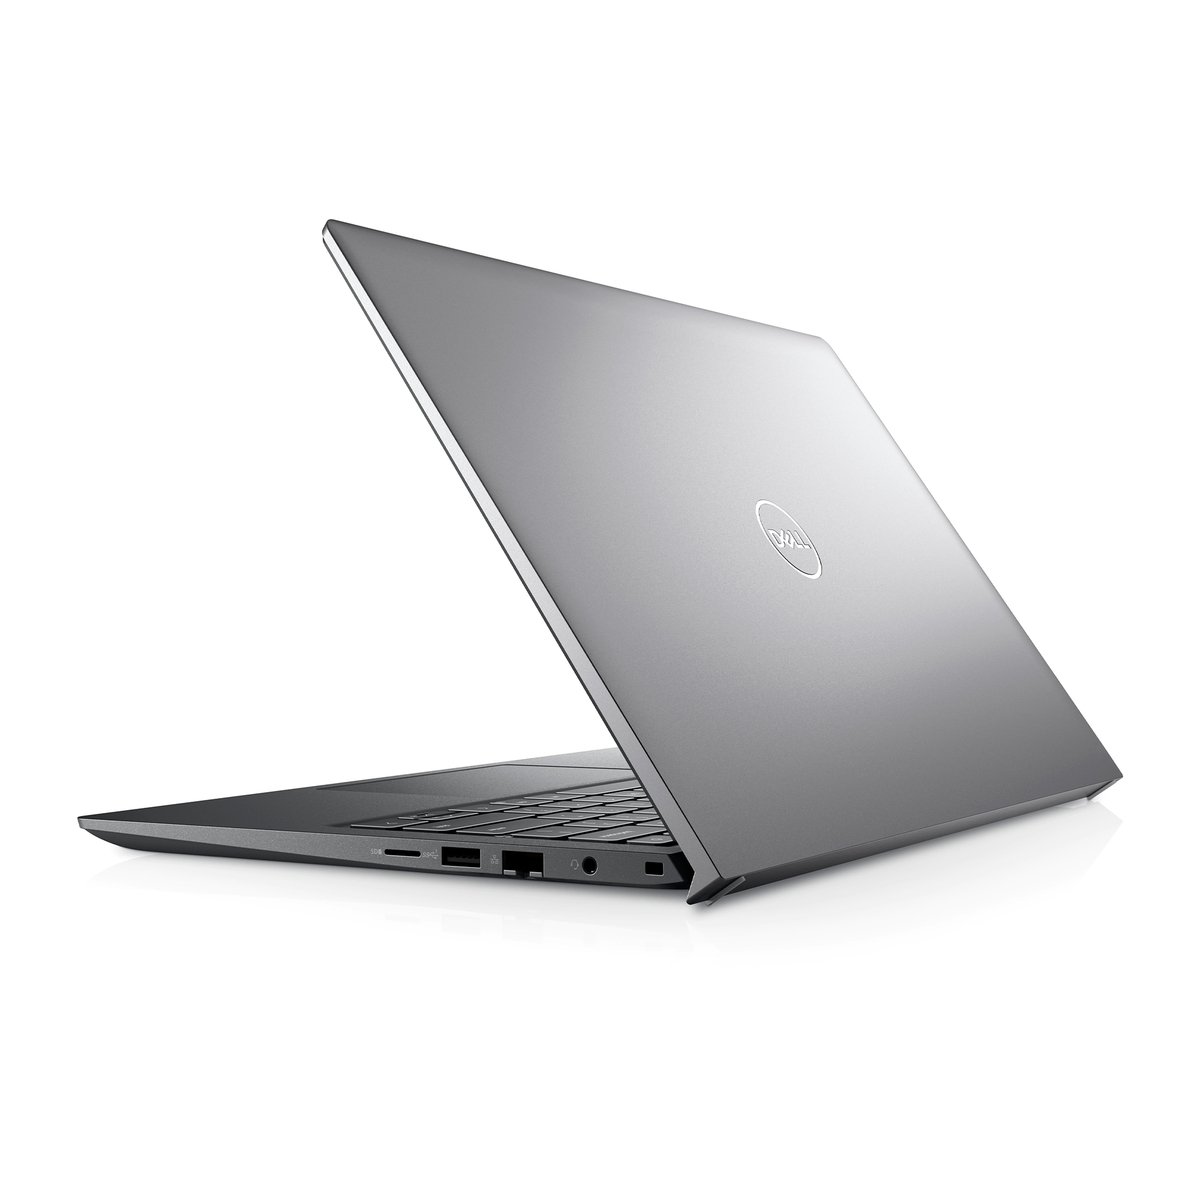 Dell Vostro 5410 Laptop,Intel Core i5-11300H,8GB RAM,512 GB SSD,VRAM NVIDIA  GeForce MX450 with 2GB  graphics,14.5inches FHD+ Display, Win10,Grey-[5410-VOS-4002-GRY]